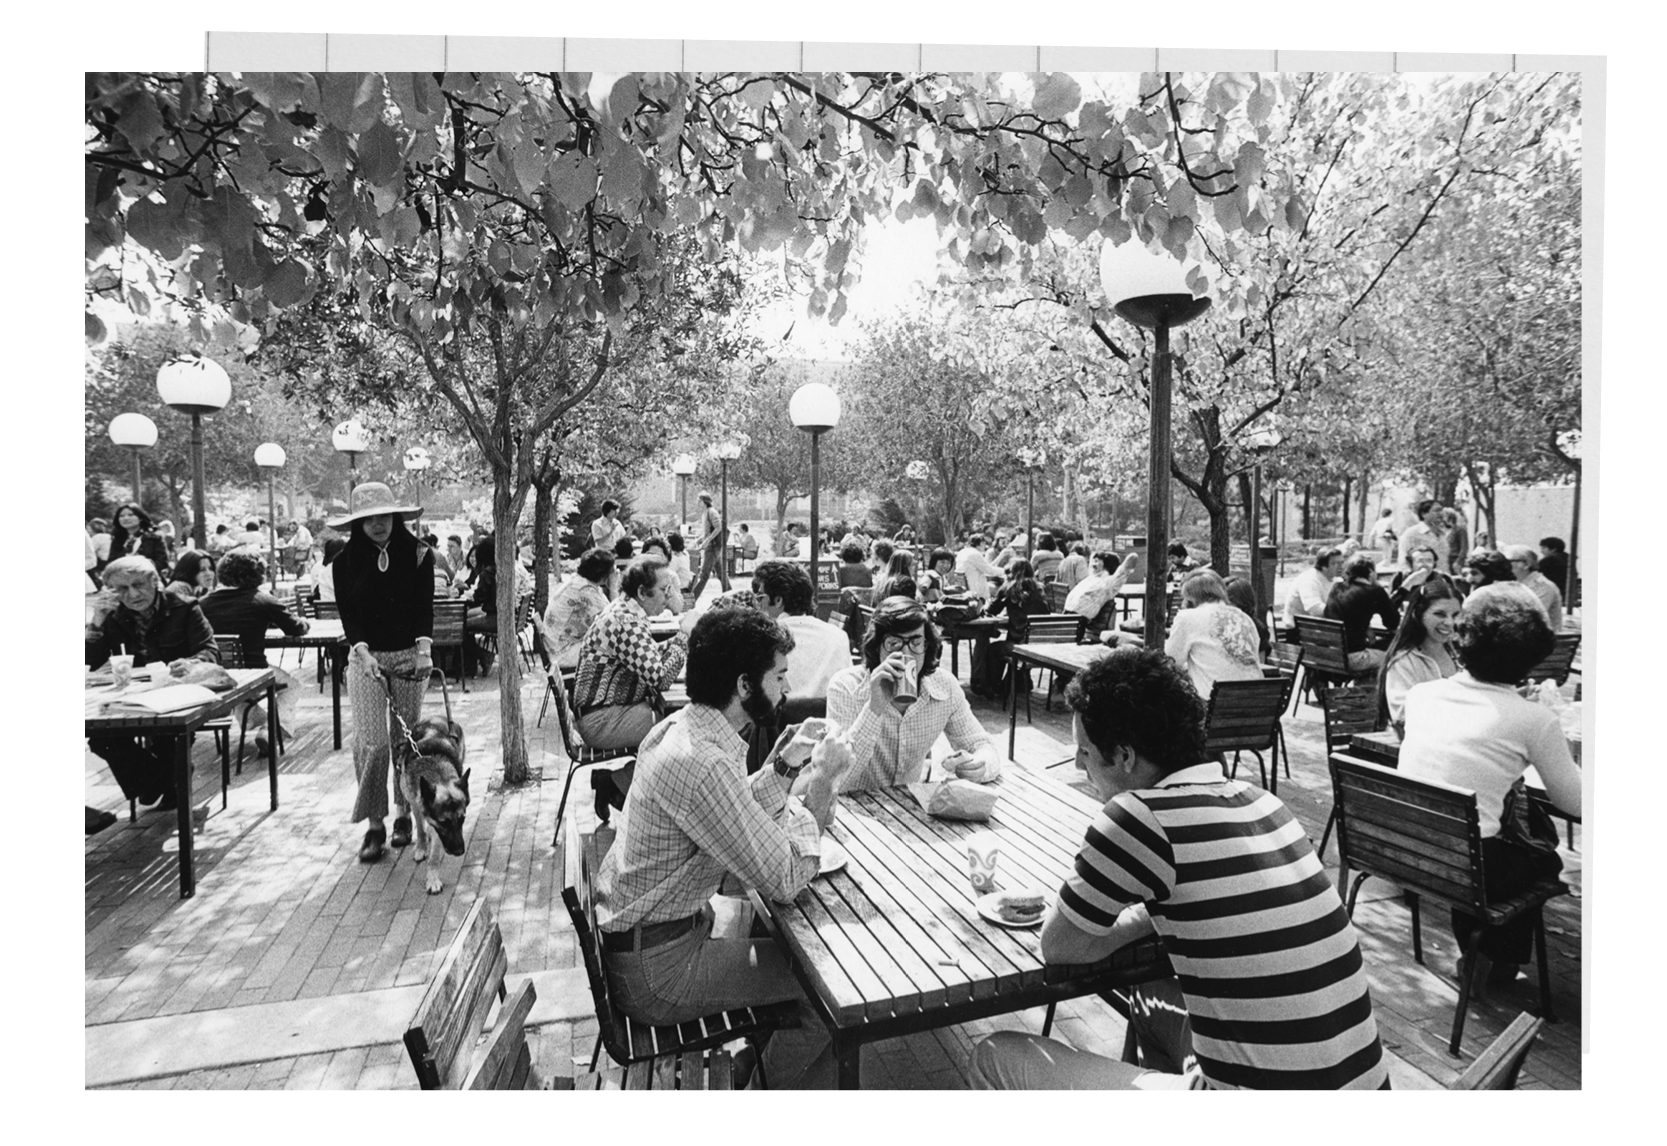 A black and white photograph of students eating in an outdoor courtyard.